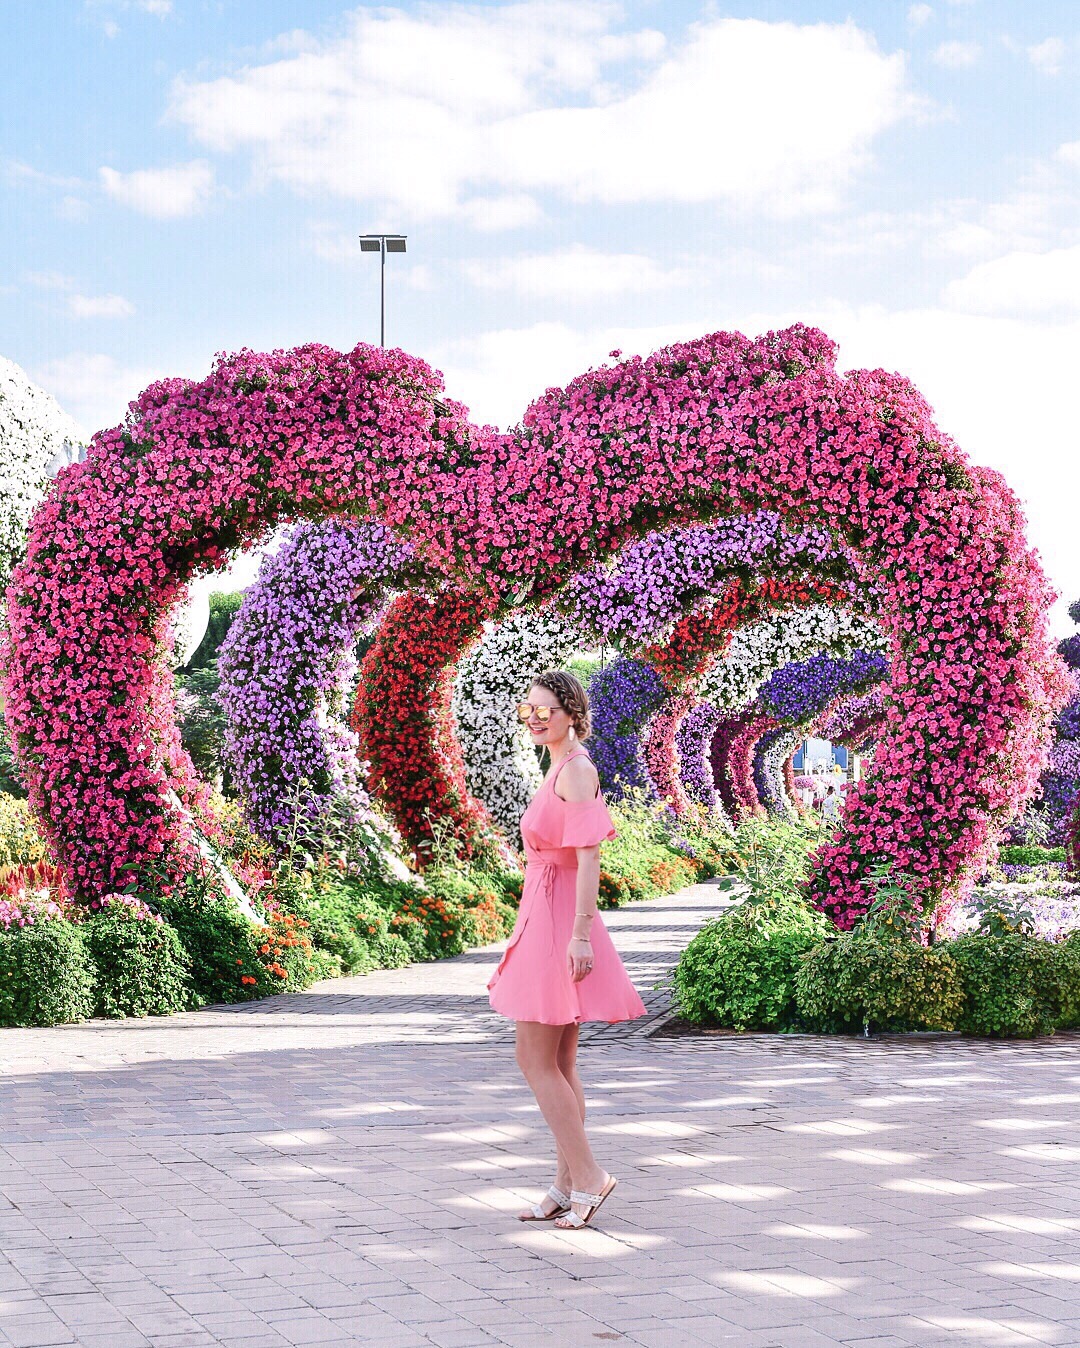 Dubai miracle garden in a privacy please pink dress